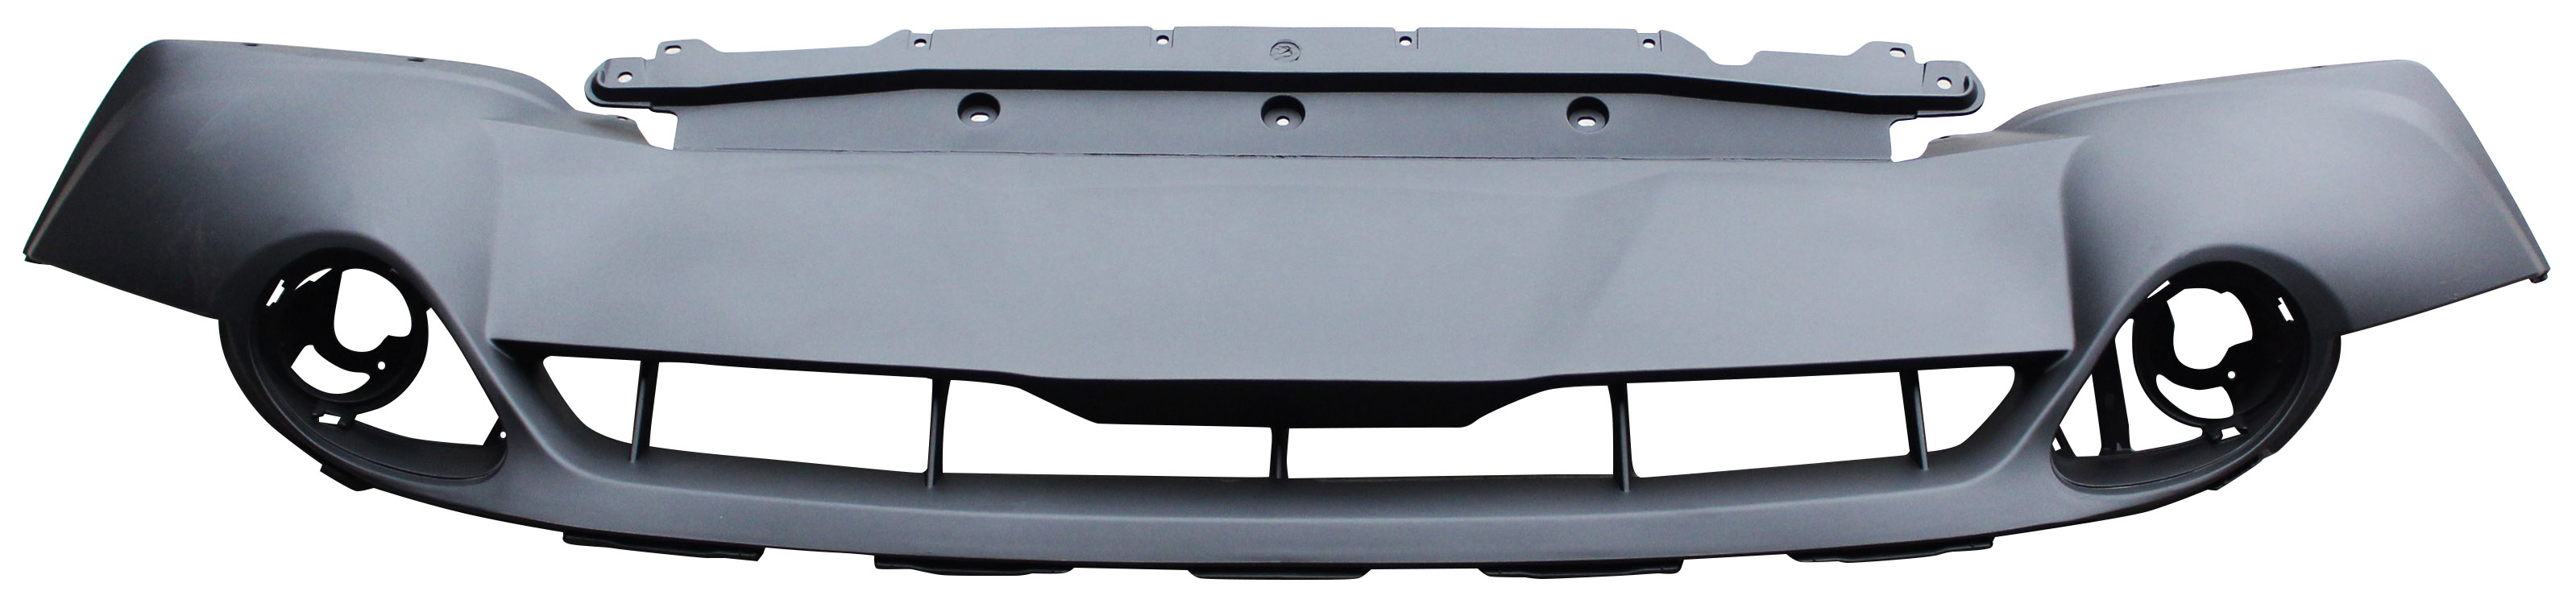 Aftermarket BUMPER COVERS for INFINITI - FX35, FX35,09-10,Front bumper cover lower